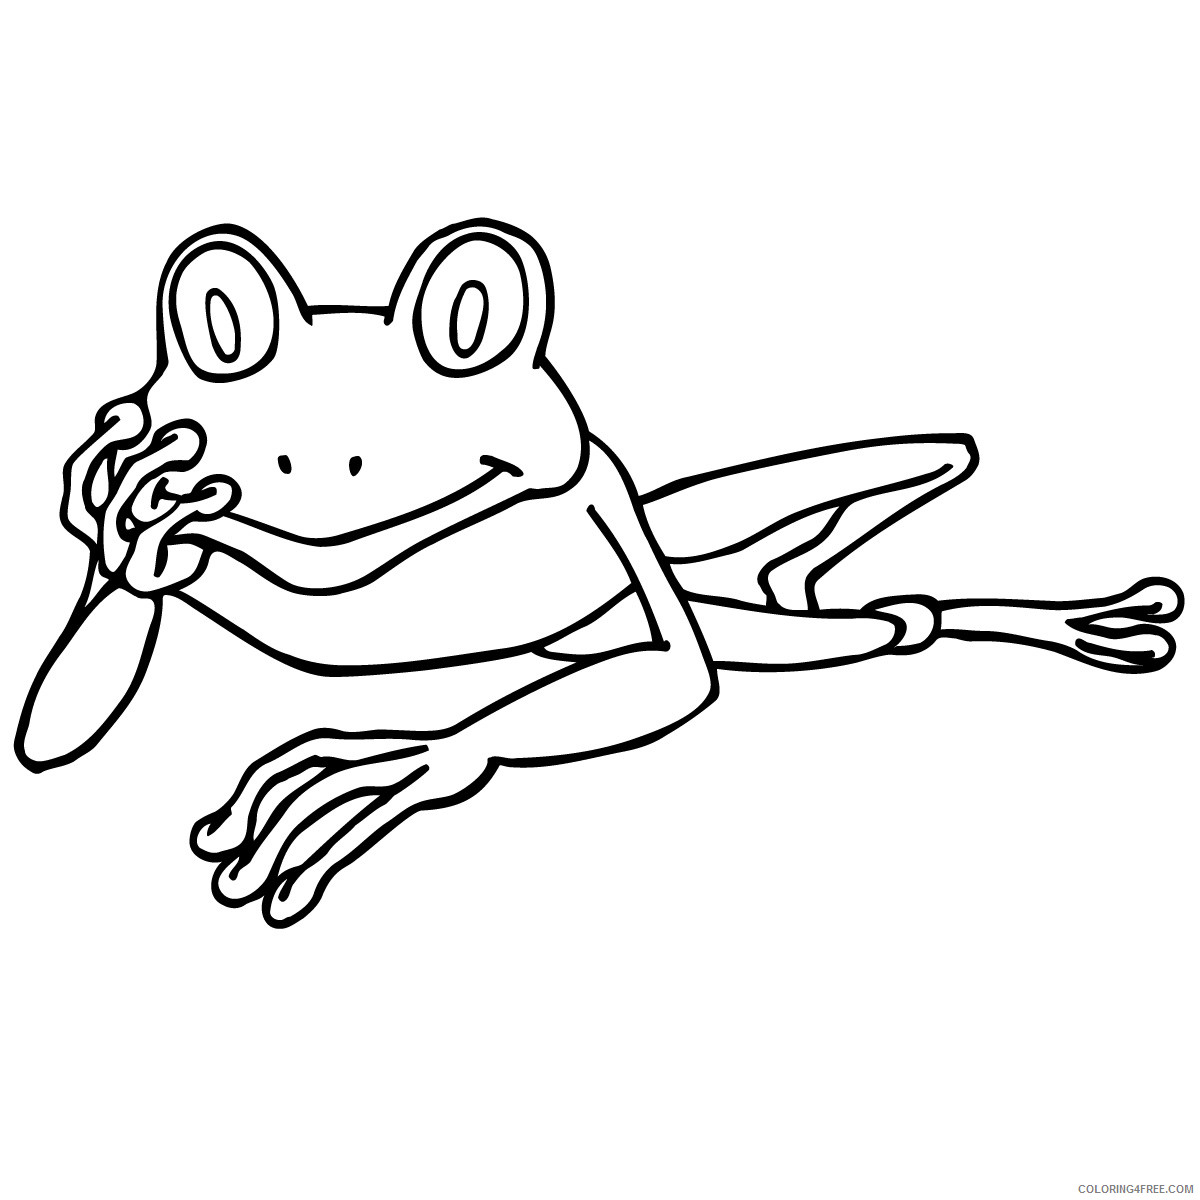 Frog Outline Coloring Pages tree frog black Printable Coloring4free